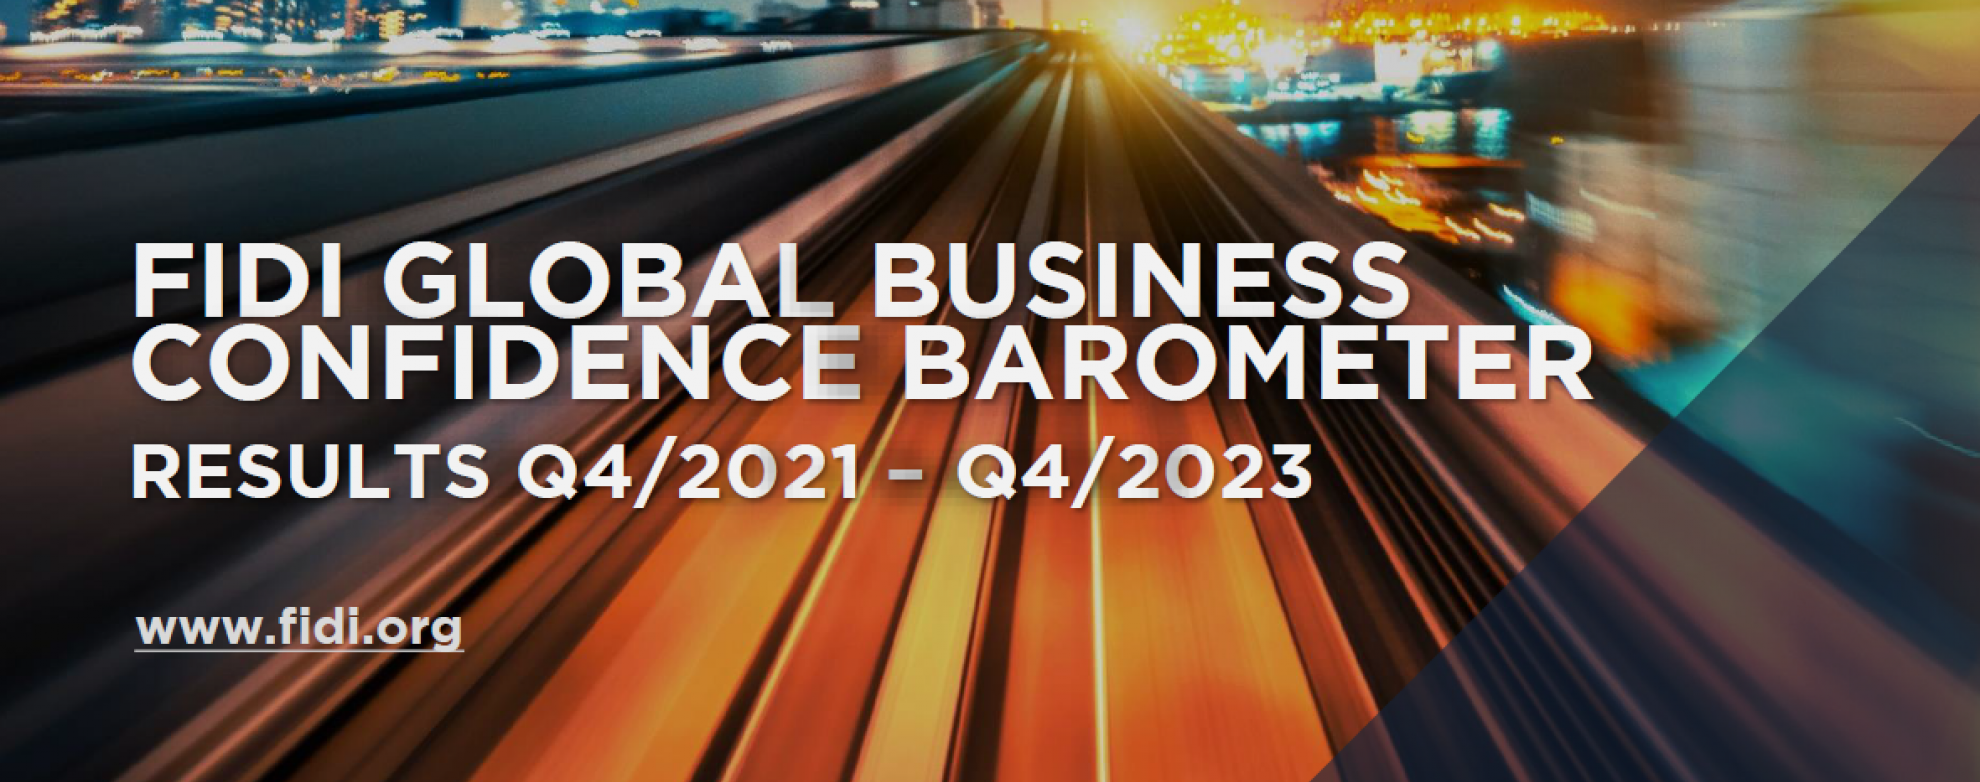 2022 &2023 FIDI Global Business Confidence Barometer report